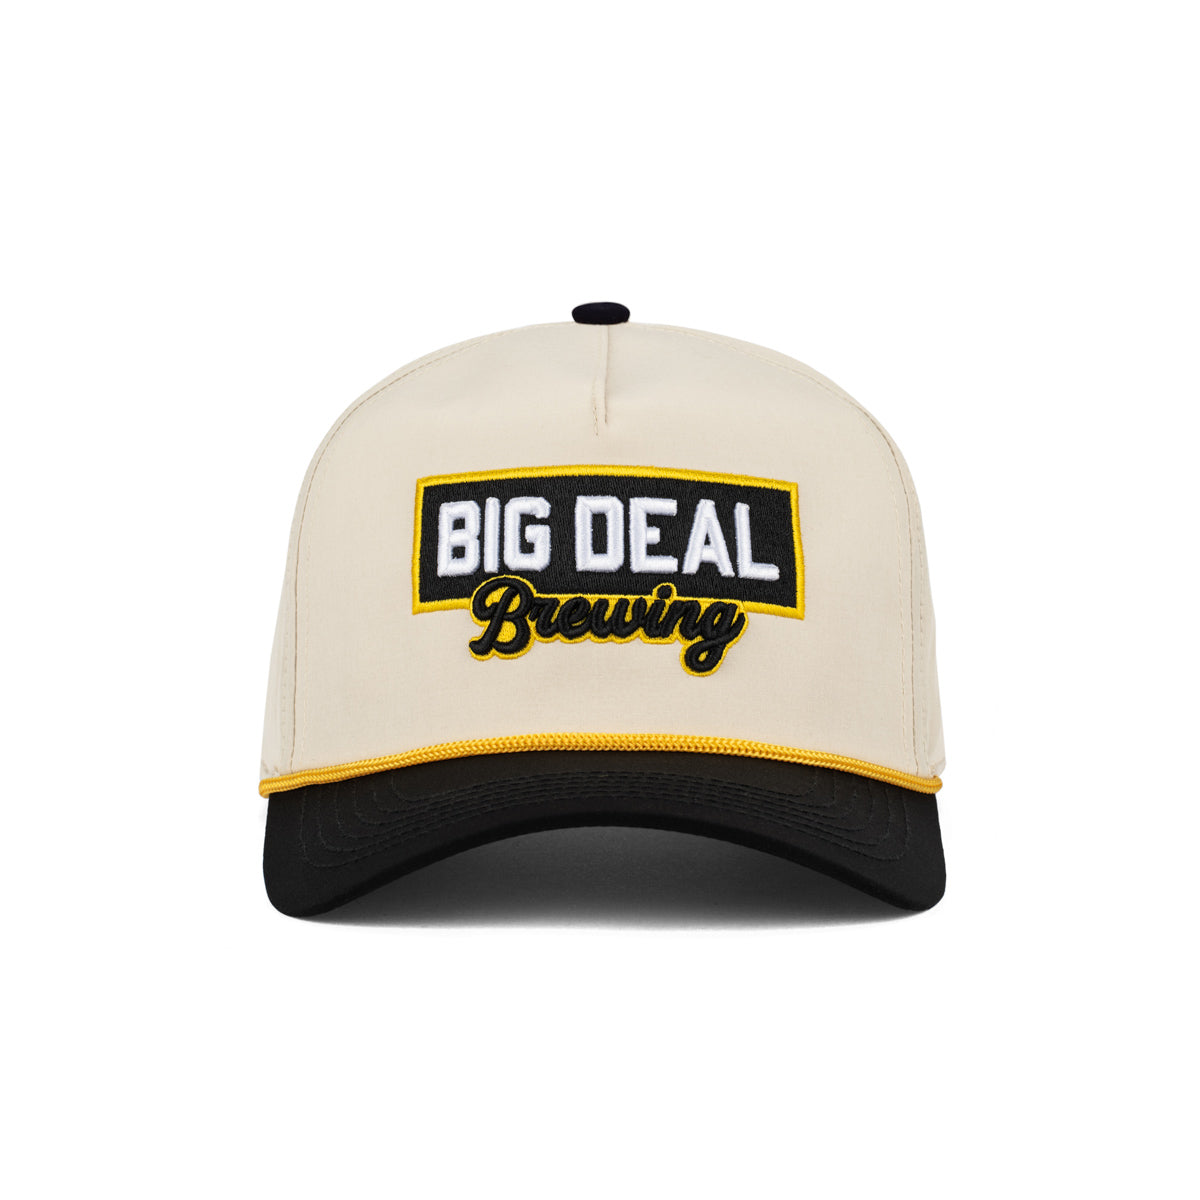 Big Deal Brewing Rope Hat-Hats-Big Deal Brewing-Cream-One Size-Barstool Sports